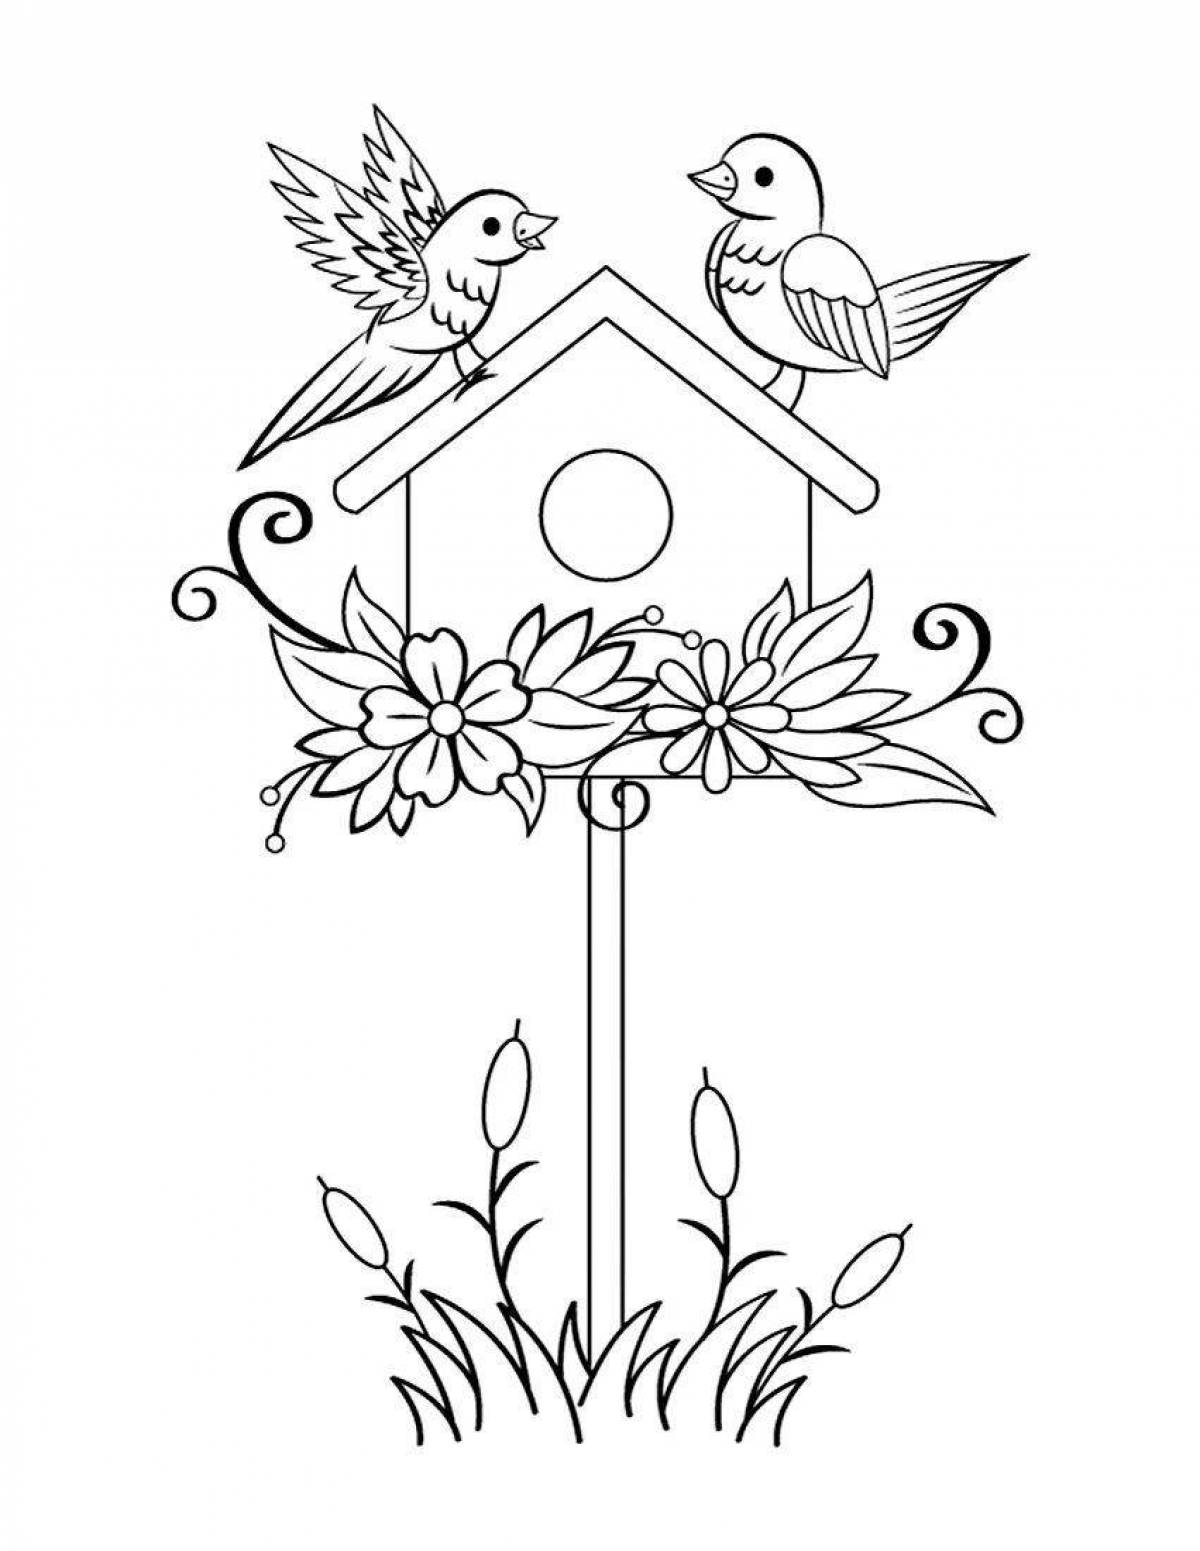 Outstanding birdhouse coloring page for 3-4 year olds